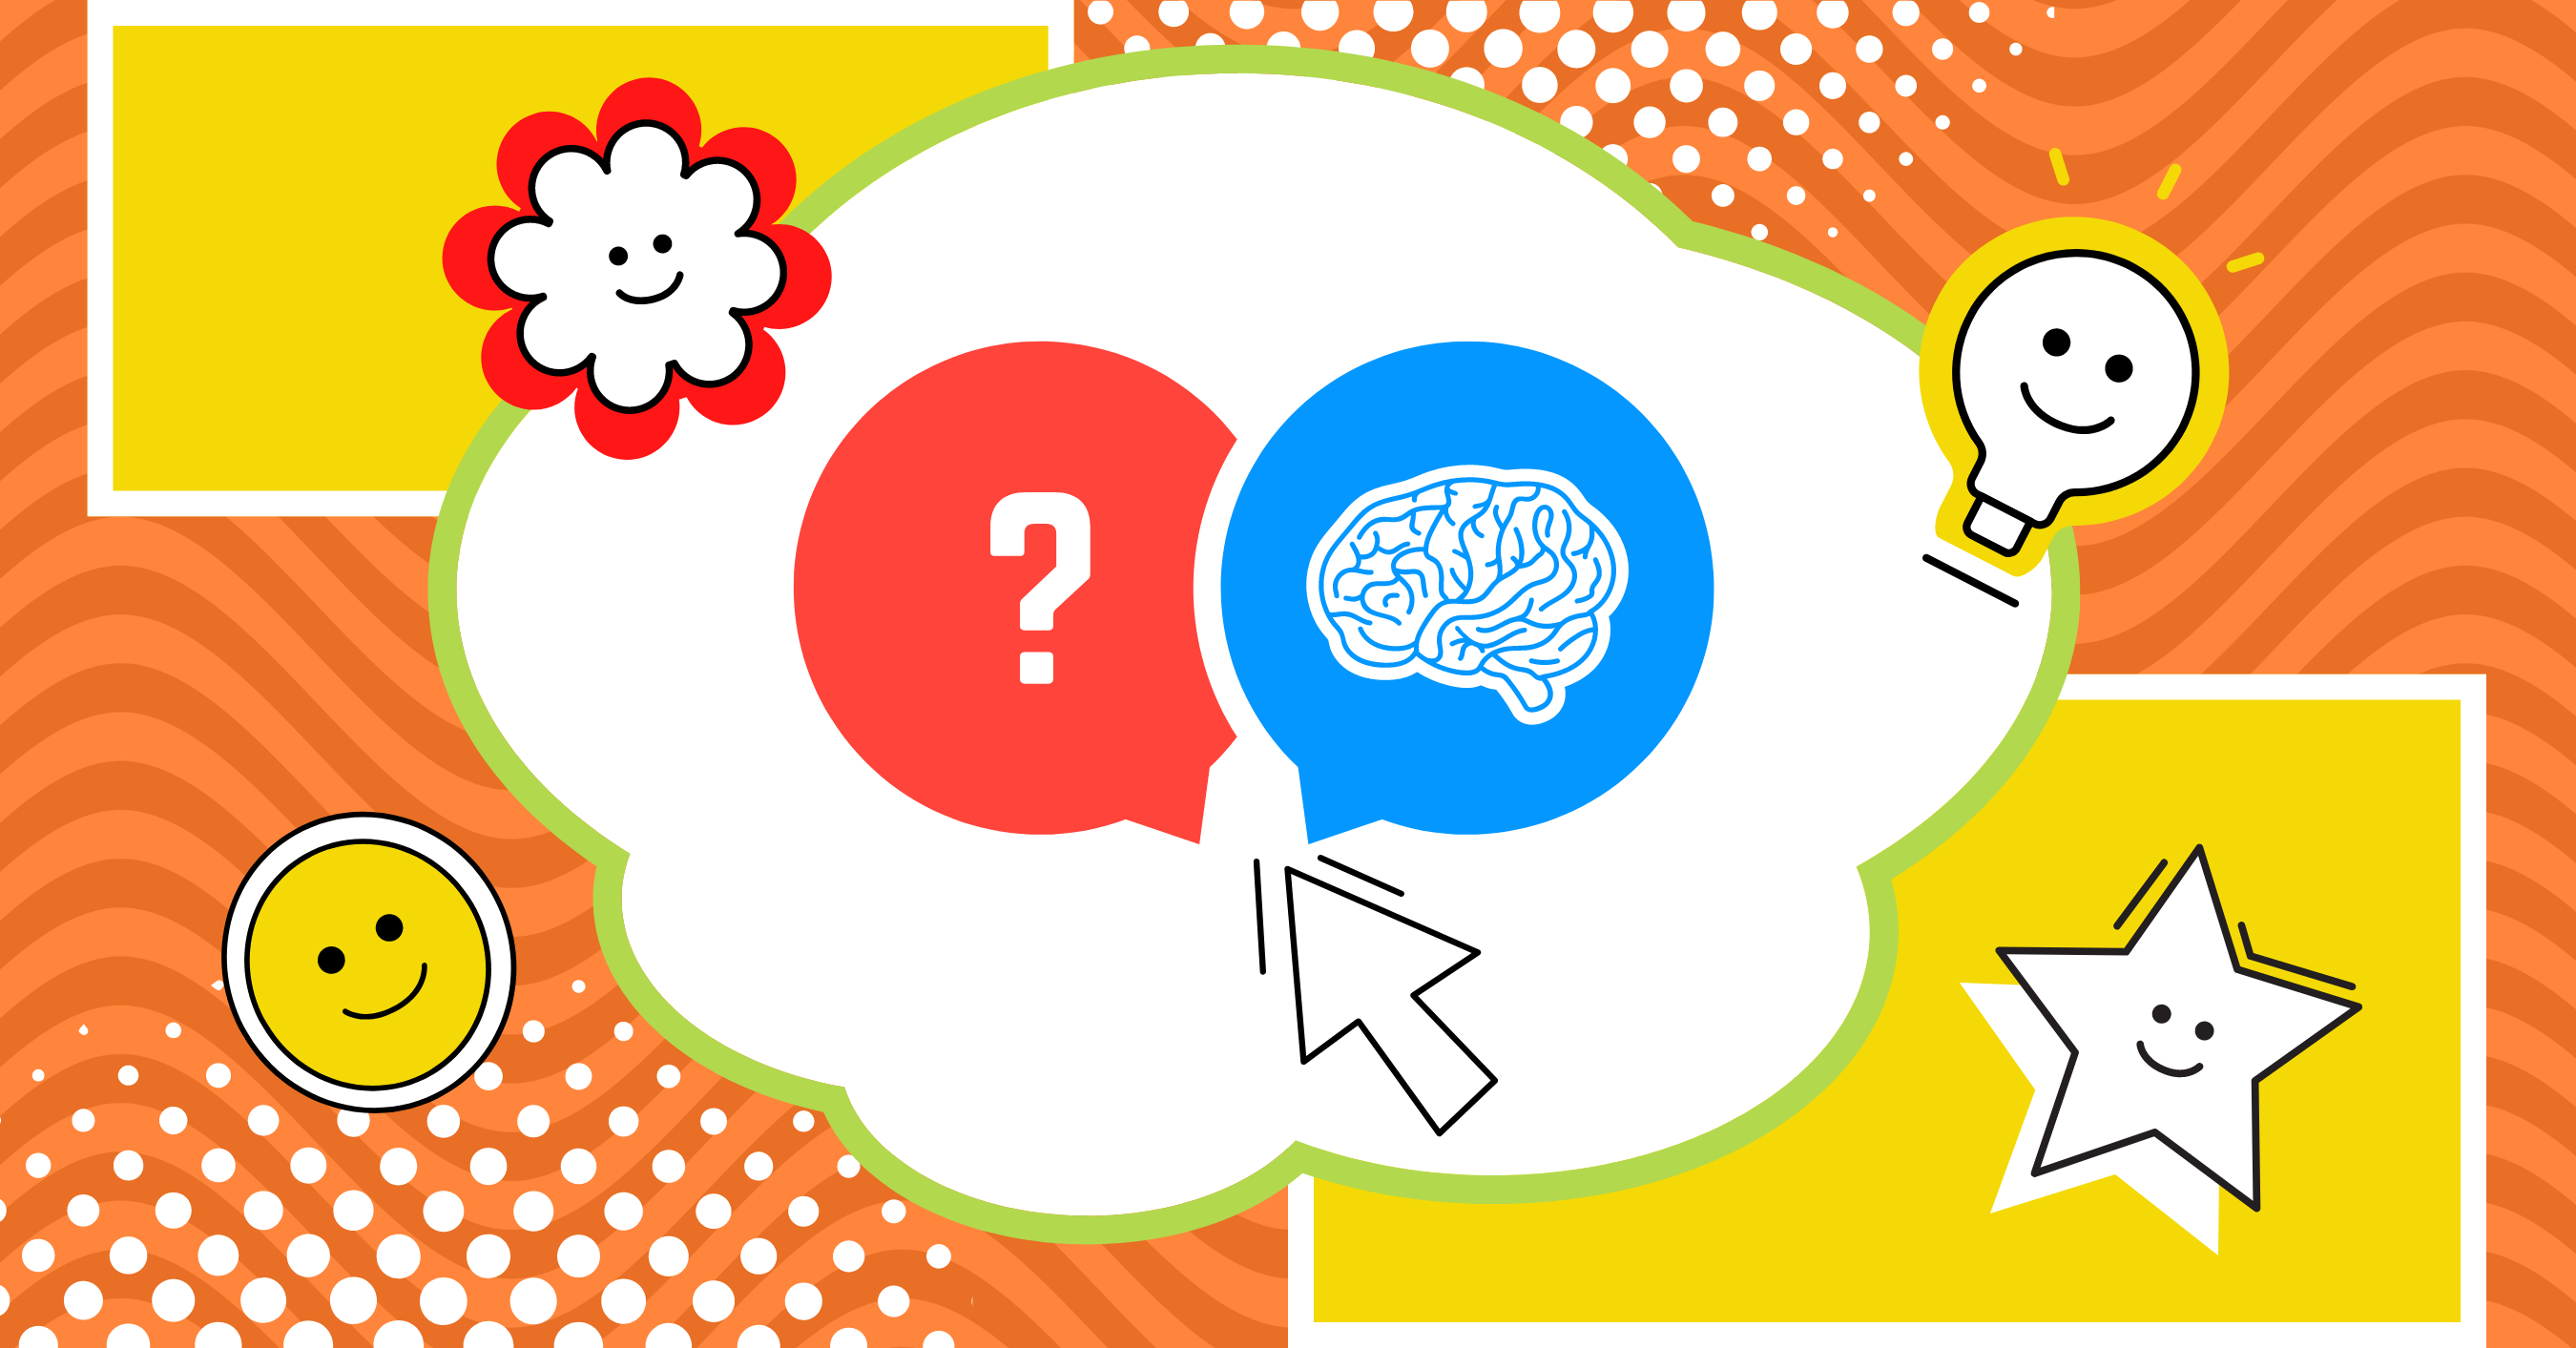 150 Challenging General Knowledge Questions to Test Your IQ